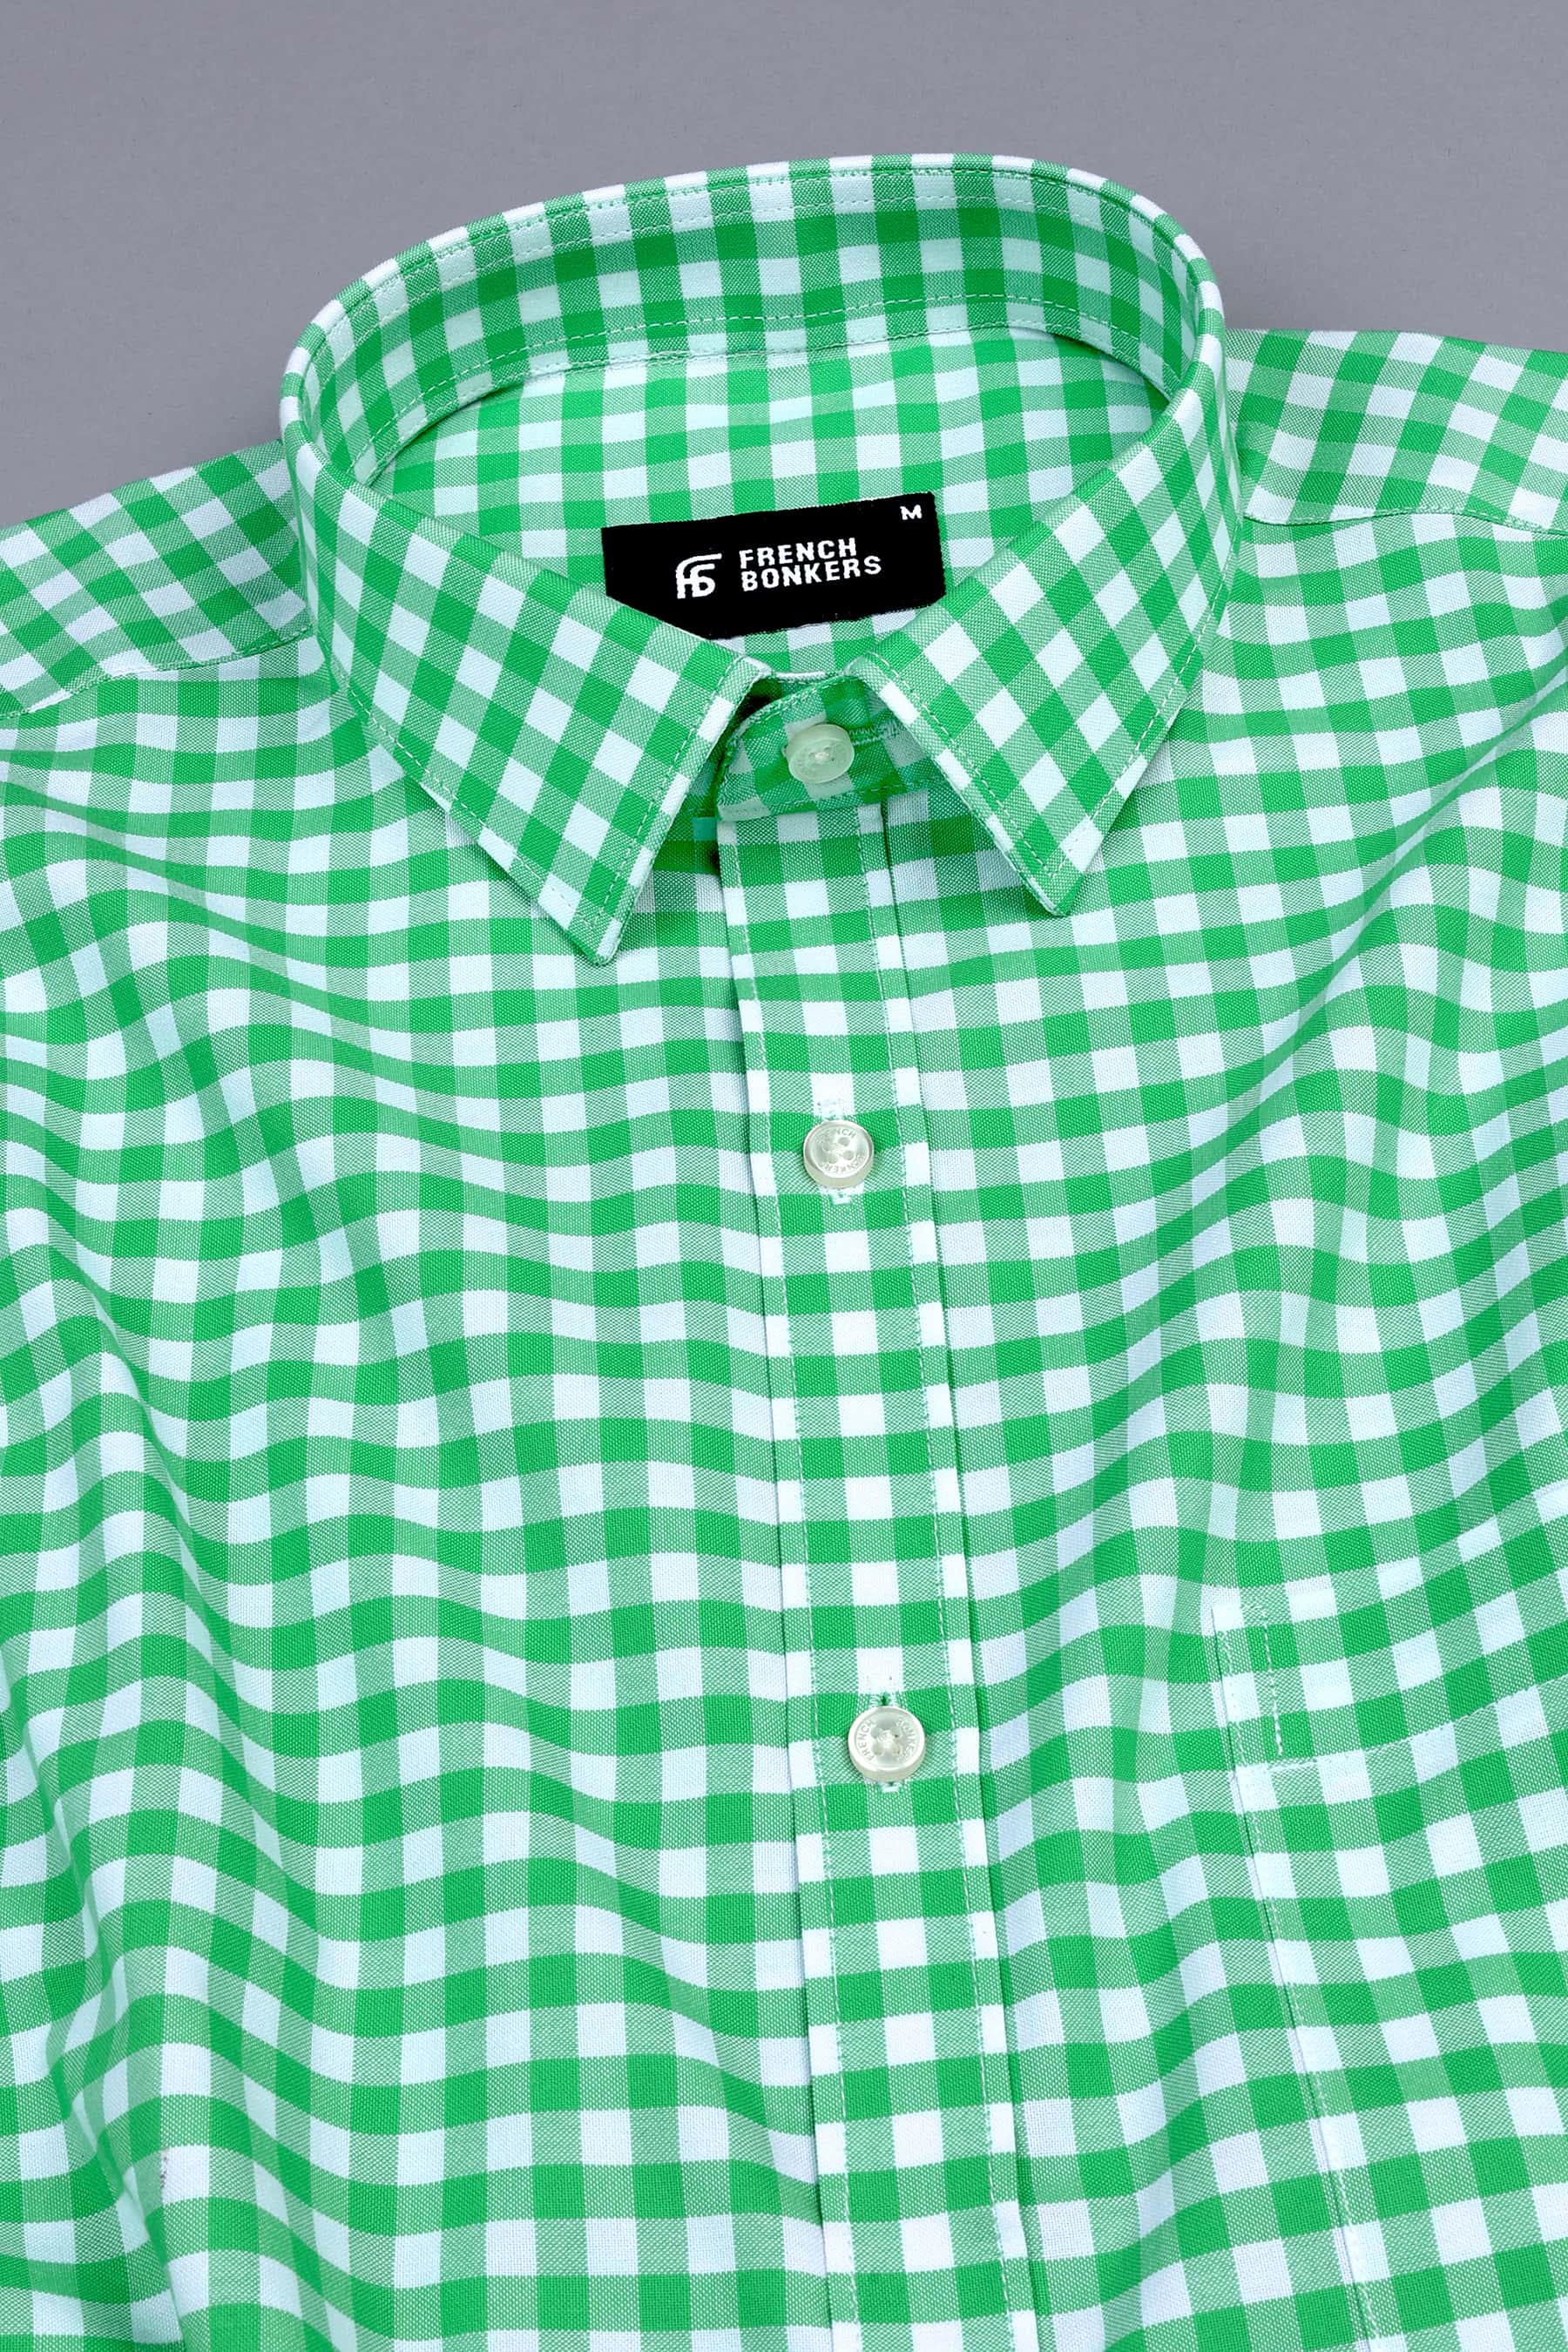 Seafoam green with white oxford gingham check shirt